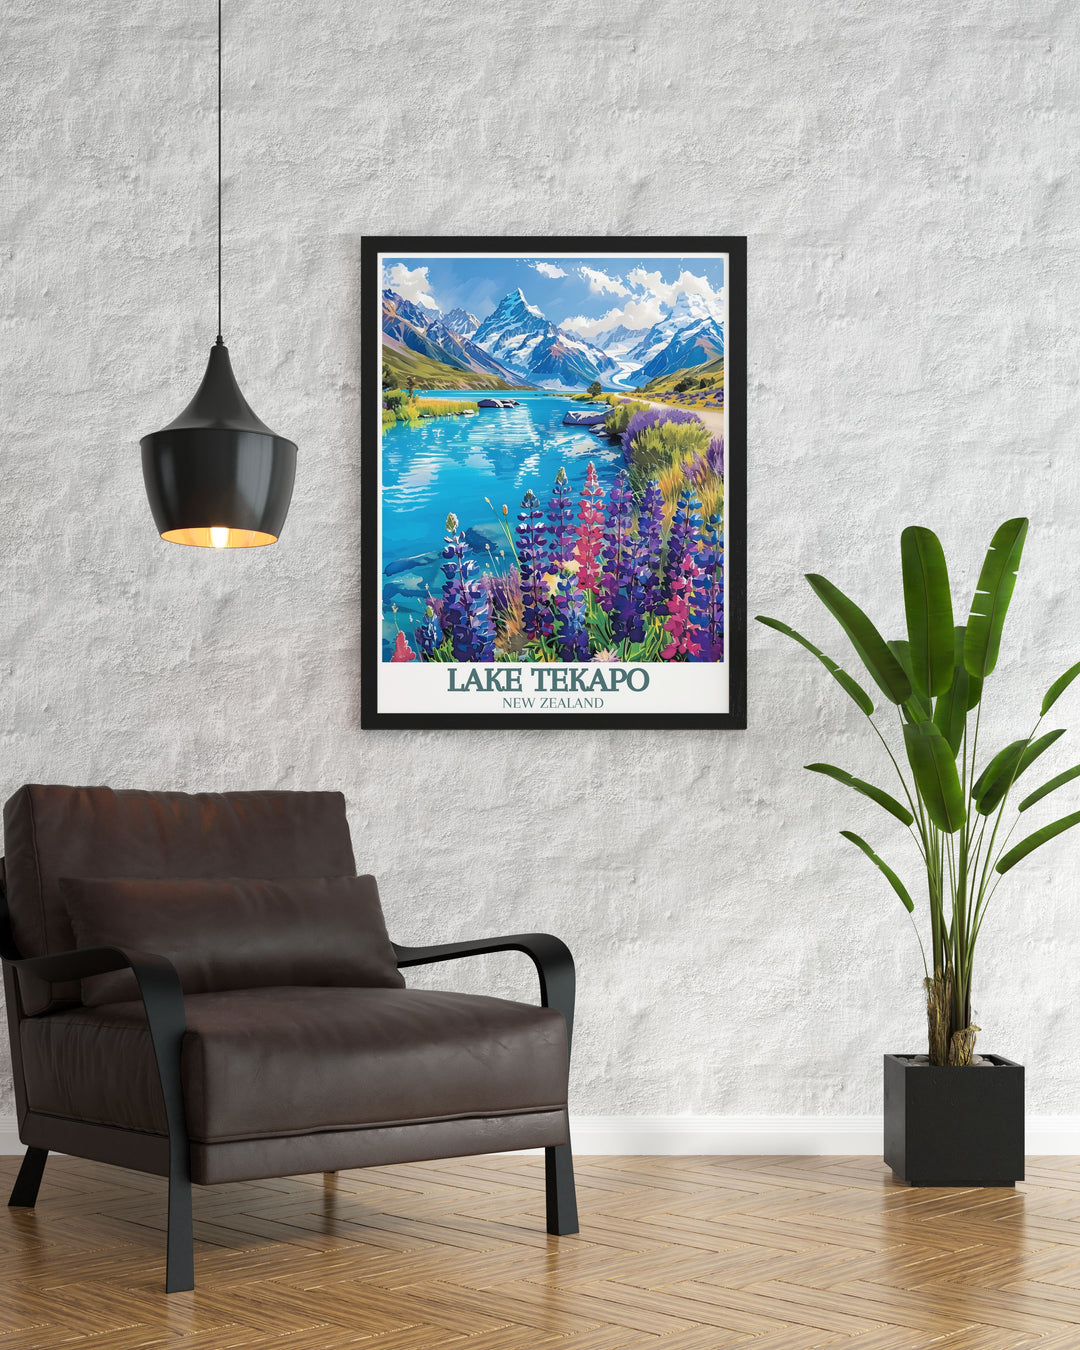 Highlighting the stunning architecture of the Church of the Good Shepherd, this travel poster features its charming stone structure set against the backdrop of Lake Tekapo and the Southern Alps. Perfect for those who appreciate historical landmarks and scenic beauty.